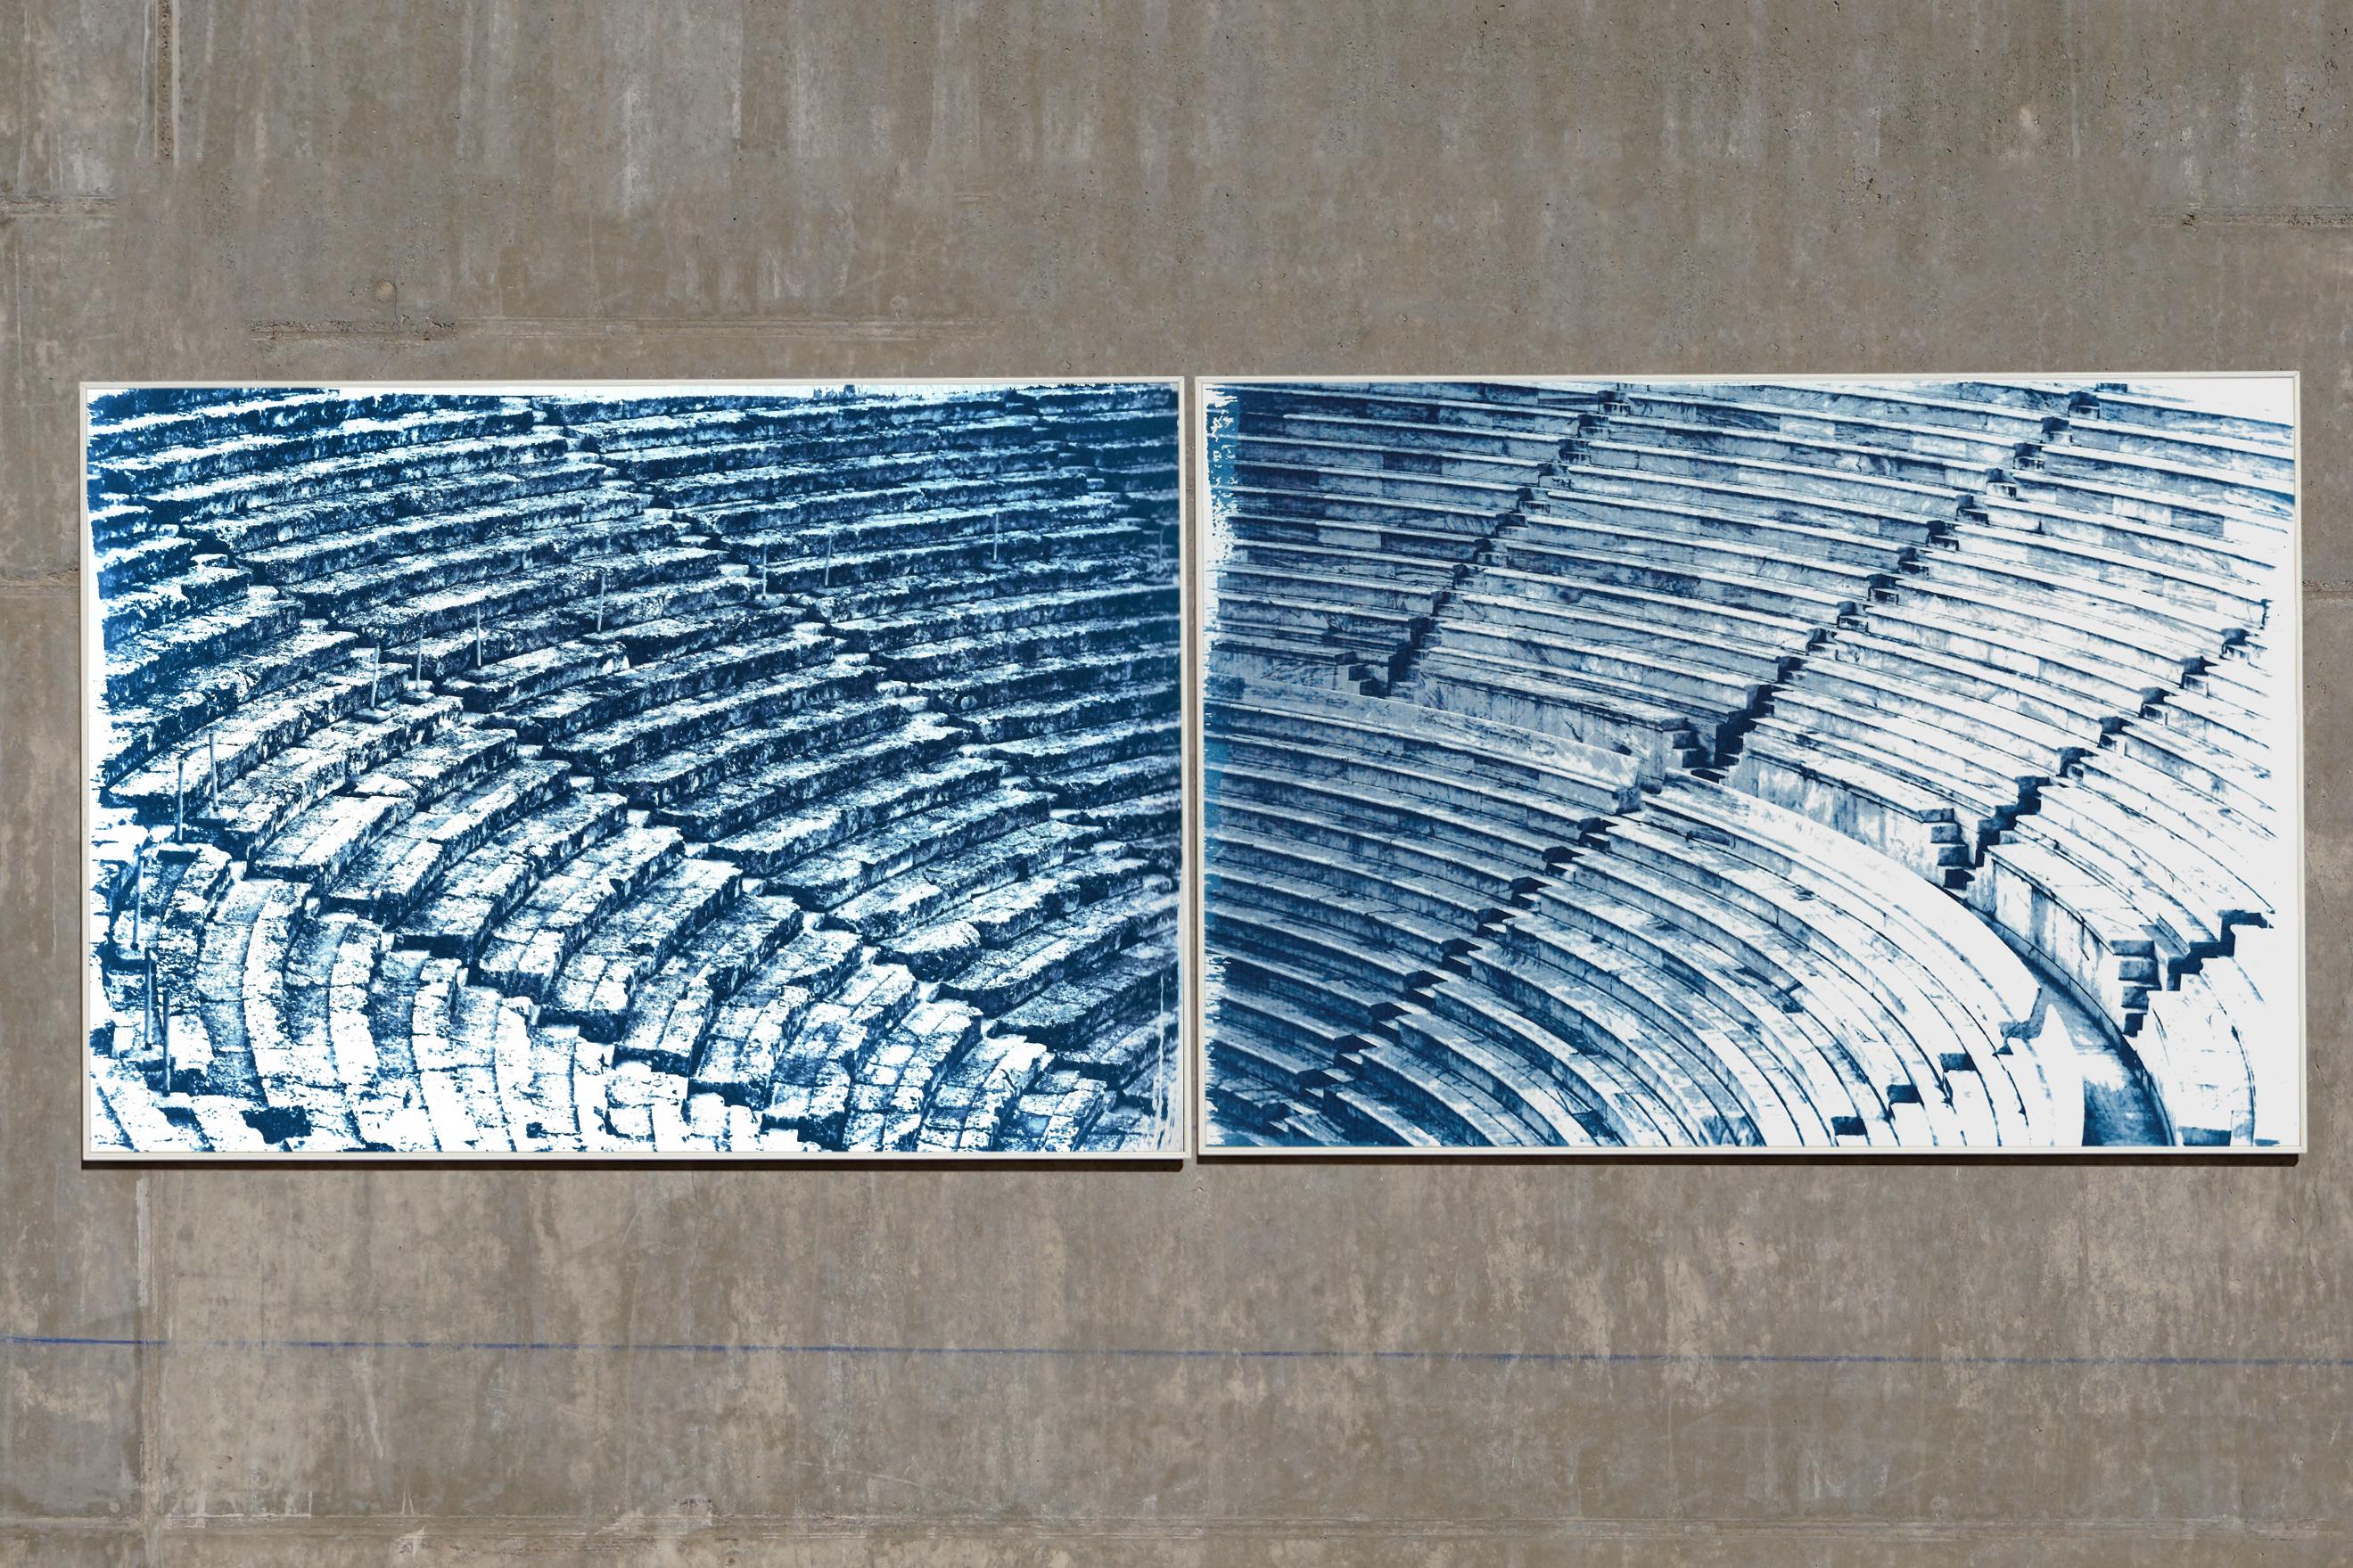 Diptych of Ancient Theaters, 200cmx70cm Cyanotypes, Greek and Roman Architecture - Print by Kind of Cyan